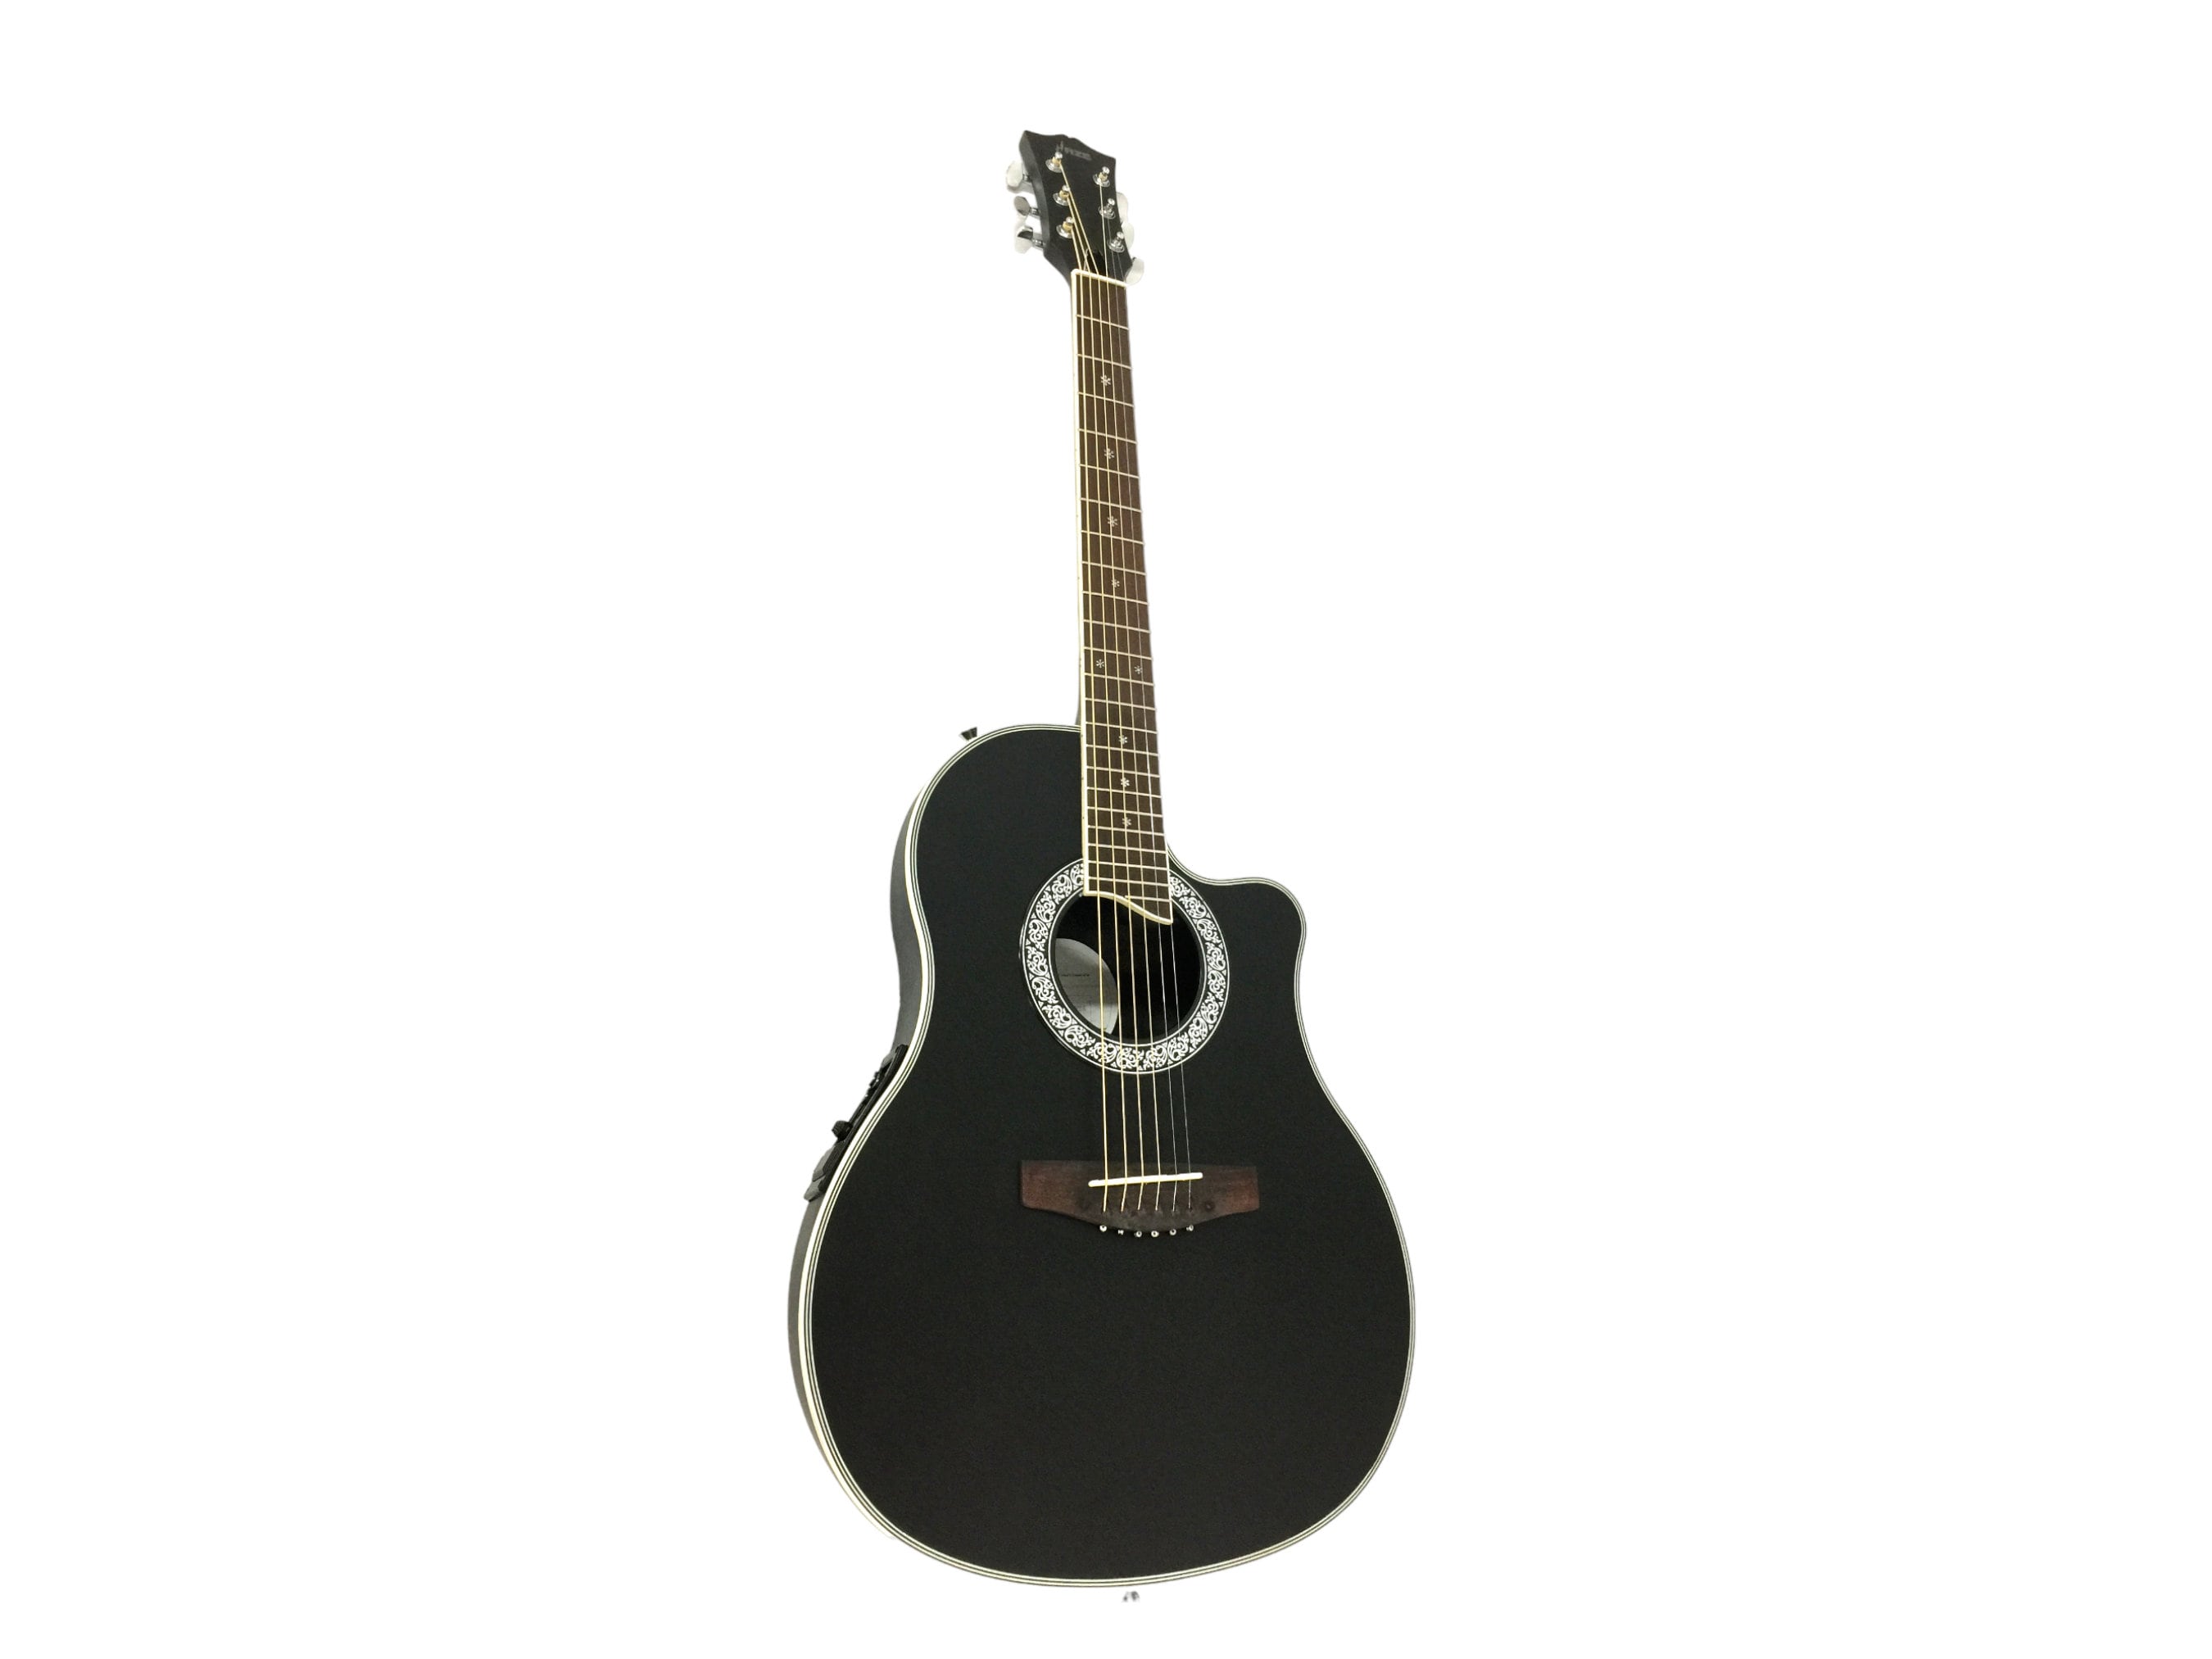 Full Size Caraya Round-back Electro-acoustic Guitar Matt Black 721CEQ/MBK  Swift Delivery With DHL, Your Package in 3-5 Business Days 